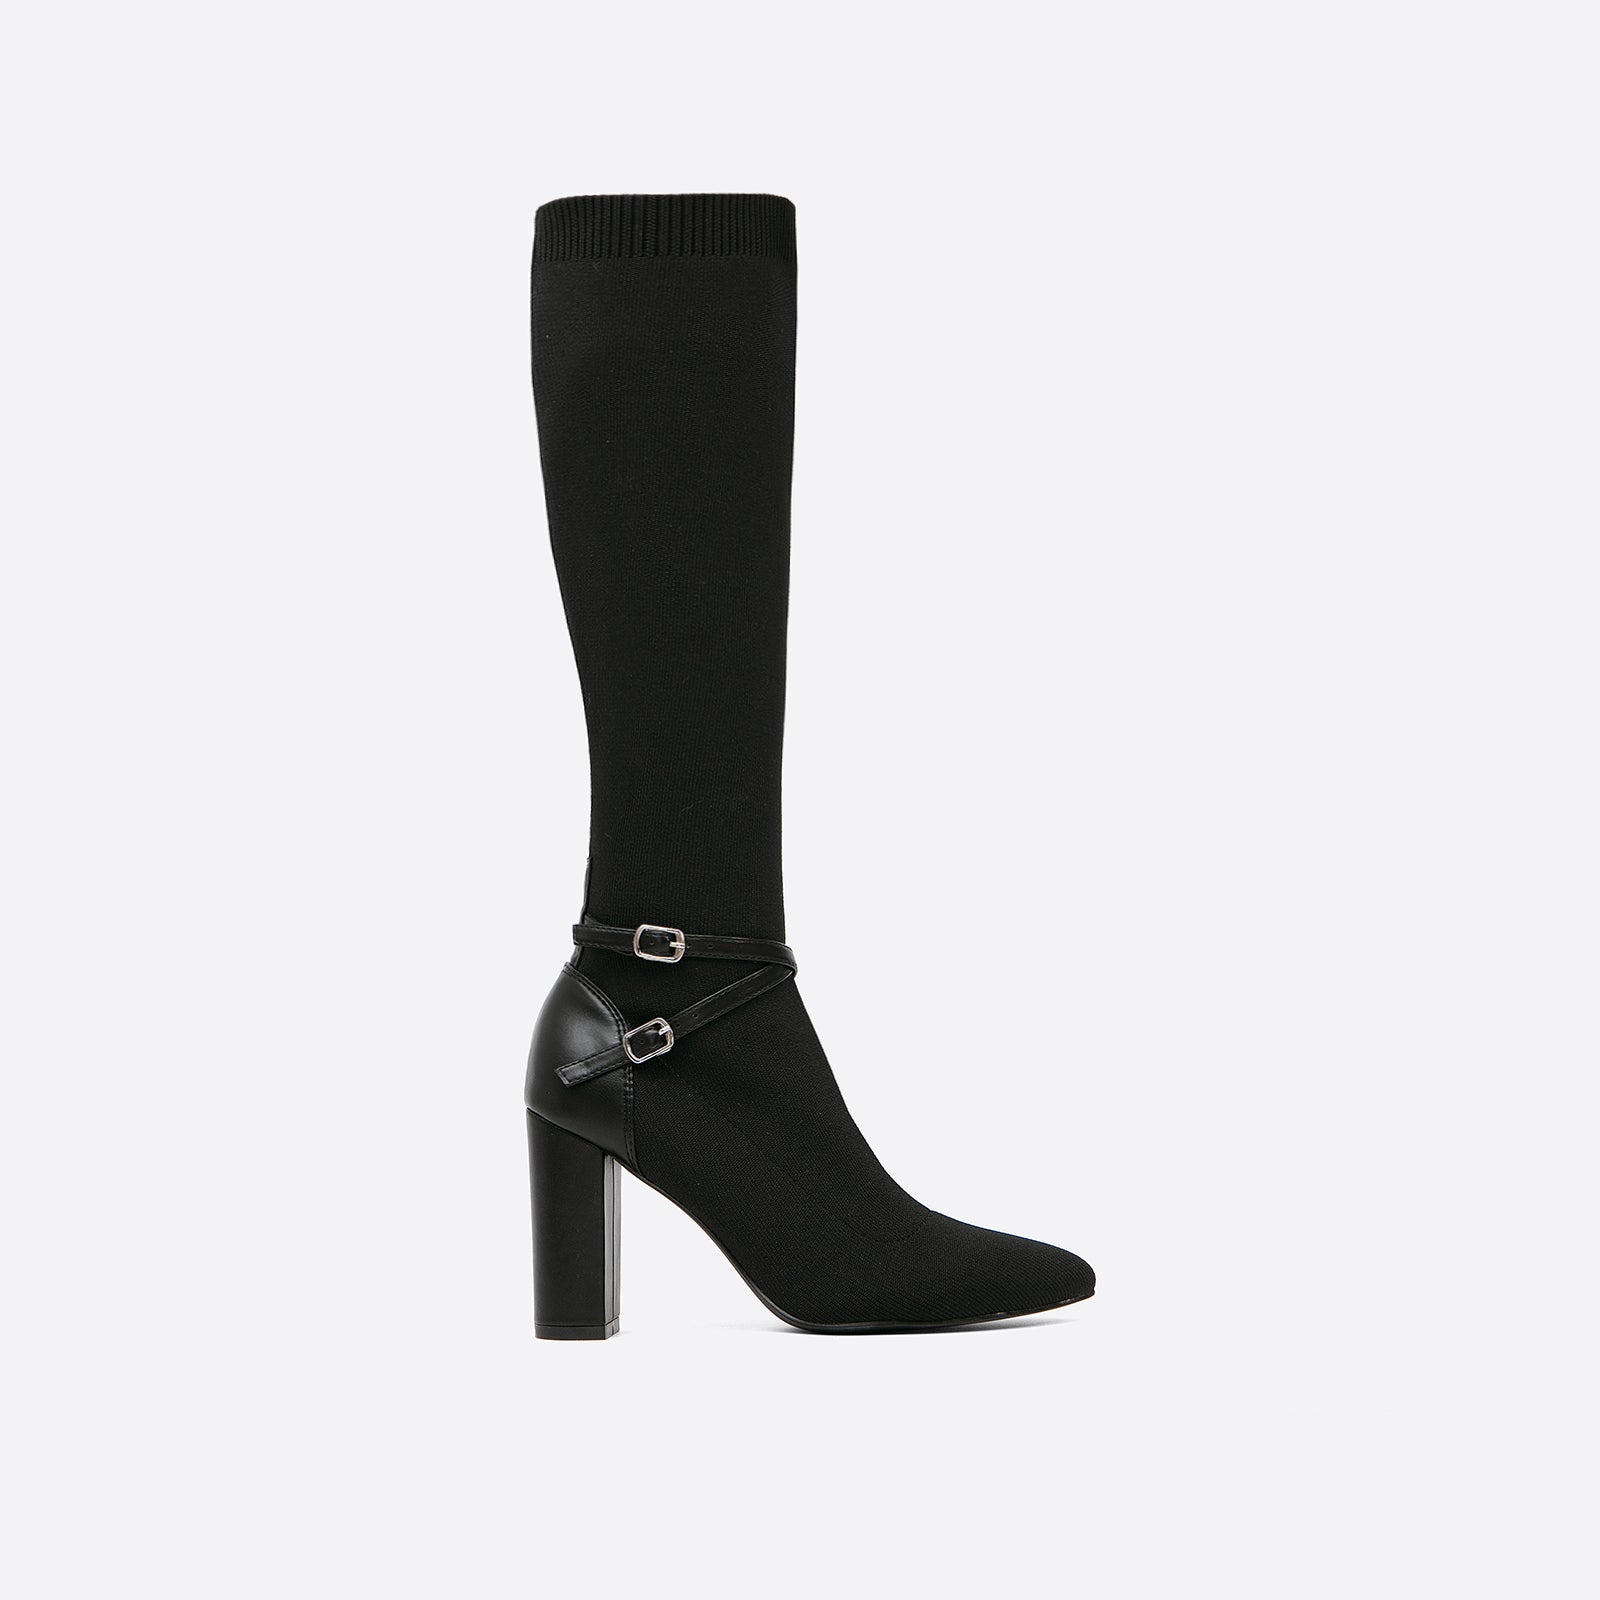 MOUSSE FIT Women Strap Decor Heeled High Boots mysite